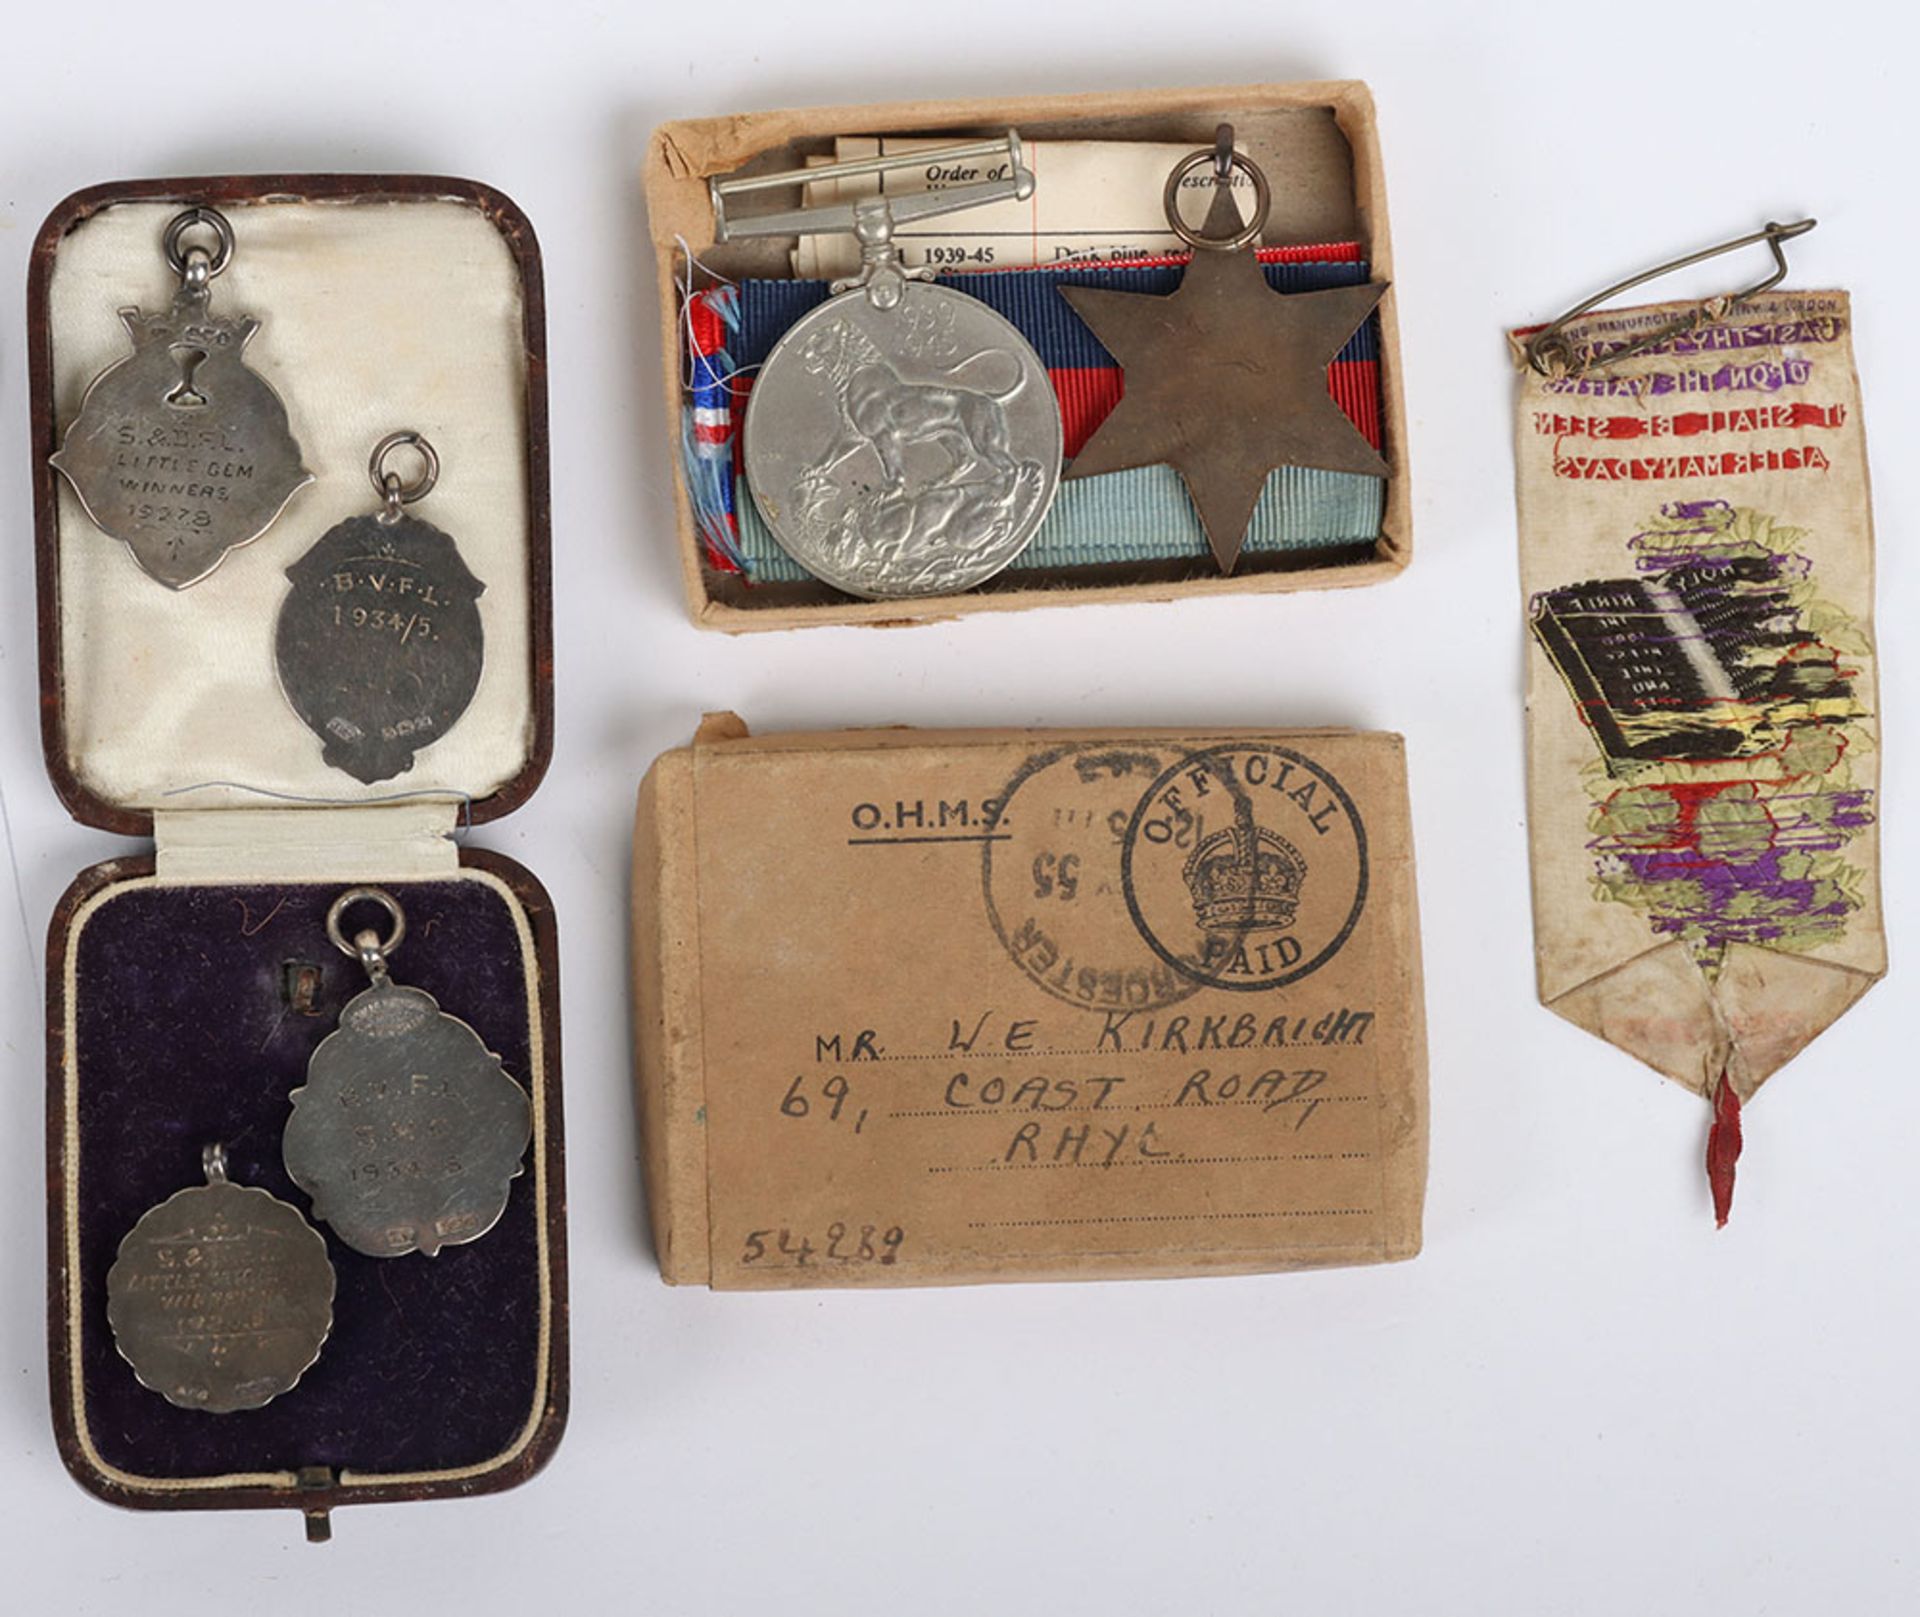 An Interesting Family Medal Group to an Interwar Period Professional Footballer who was Taken Prison - Image 9 of 10